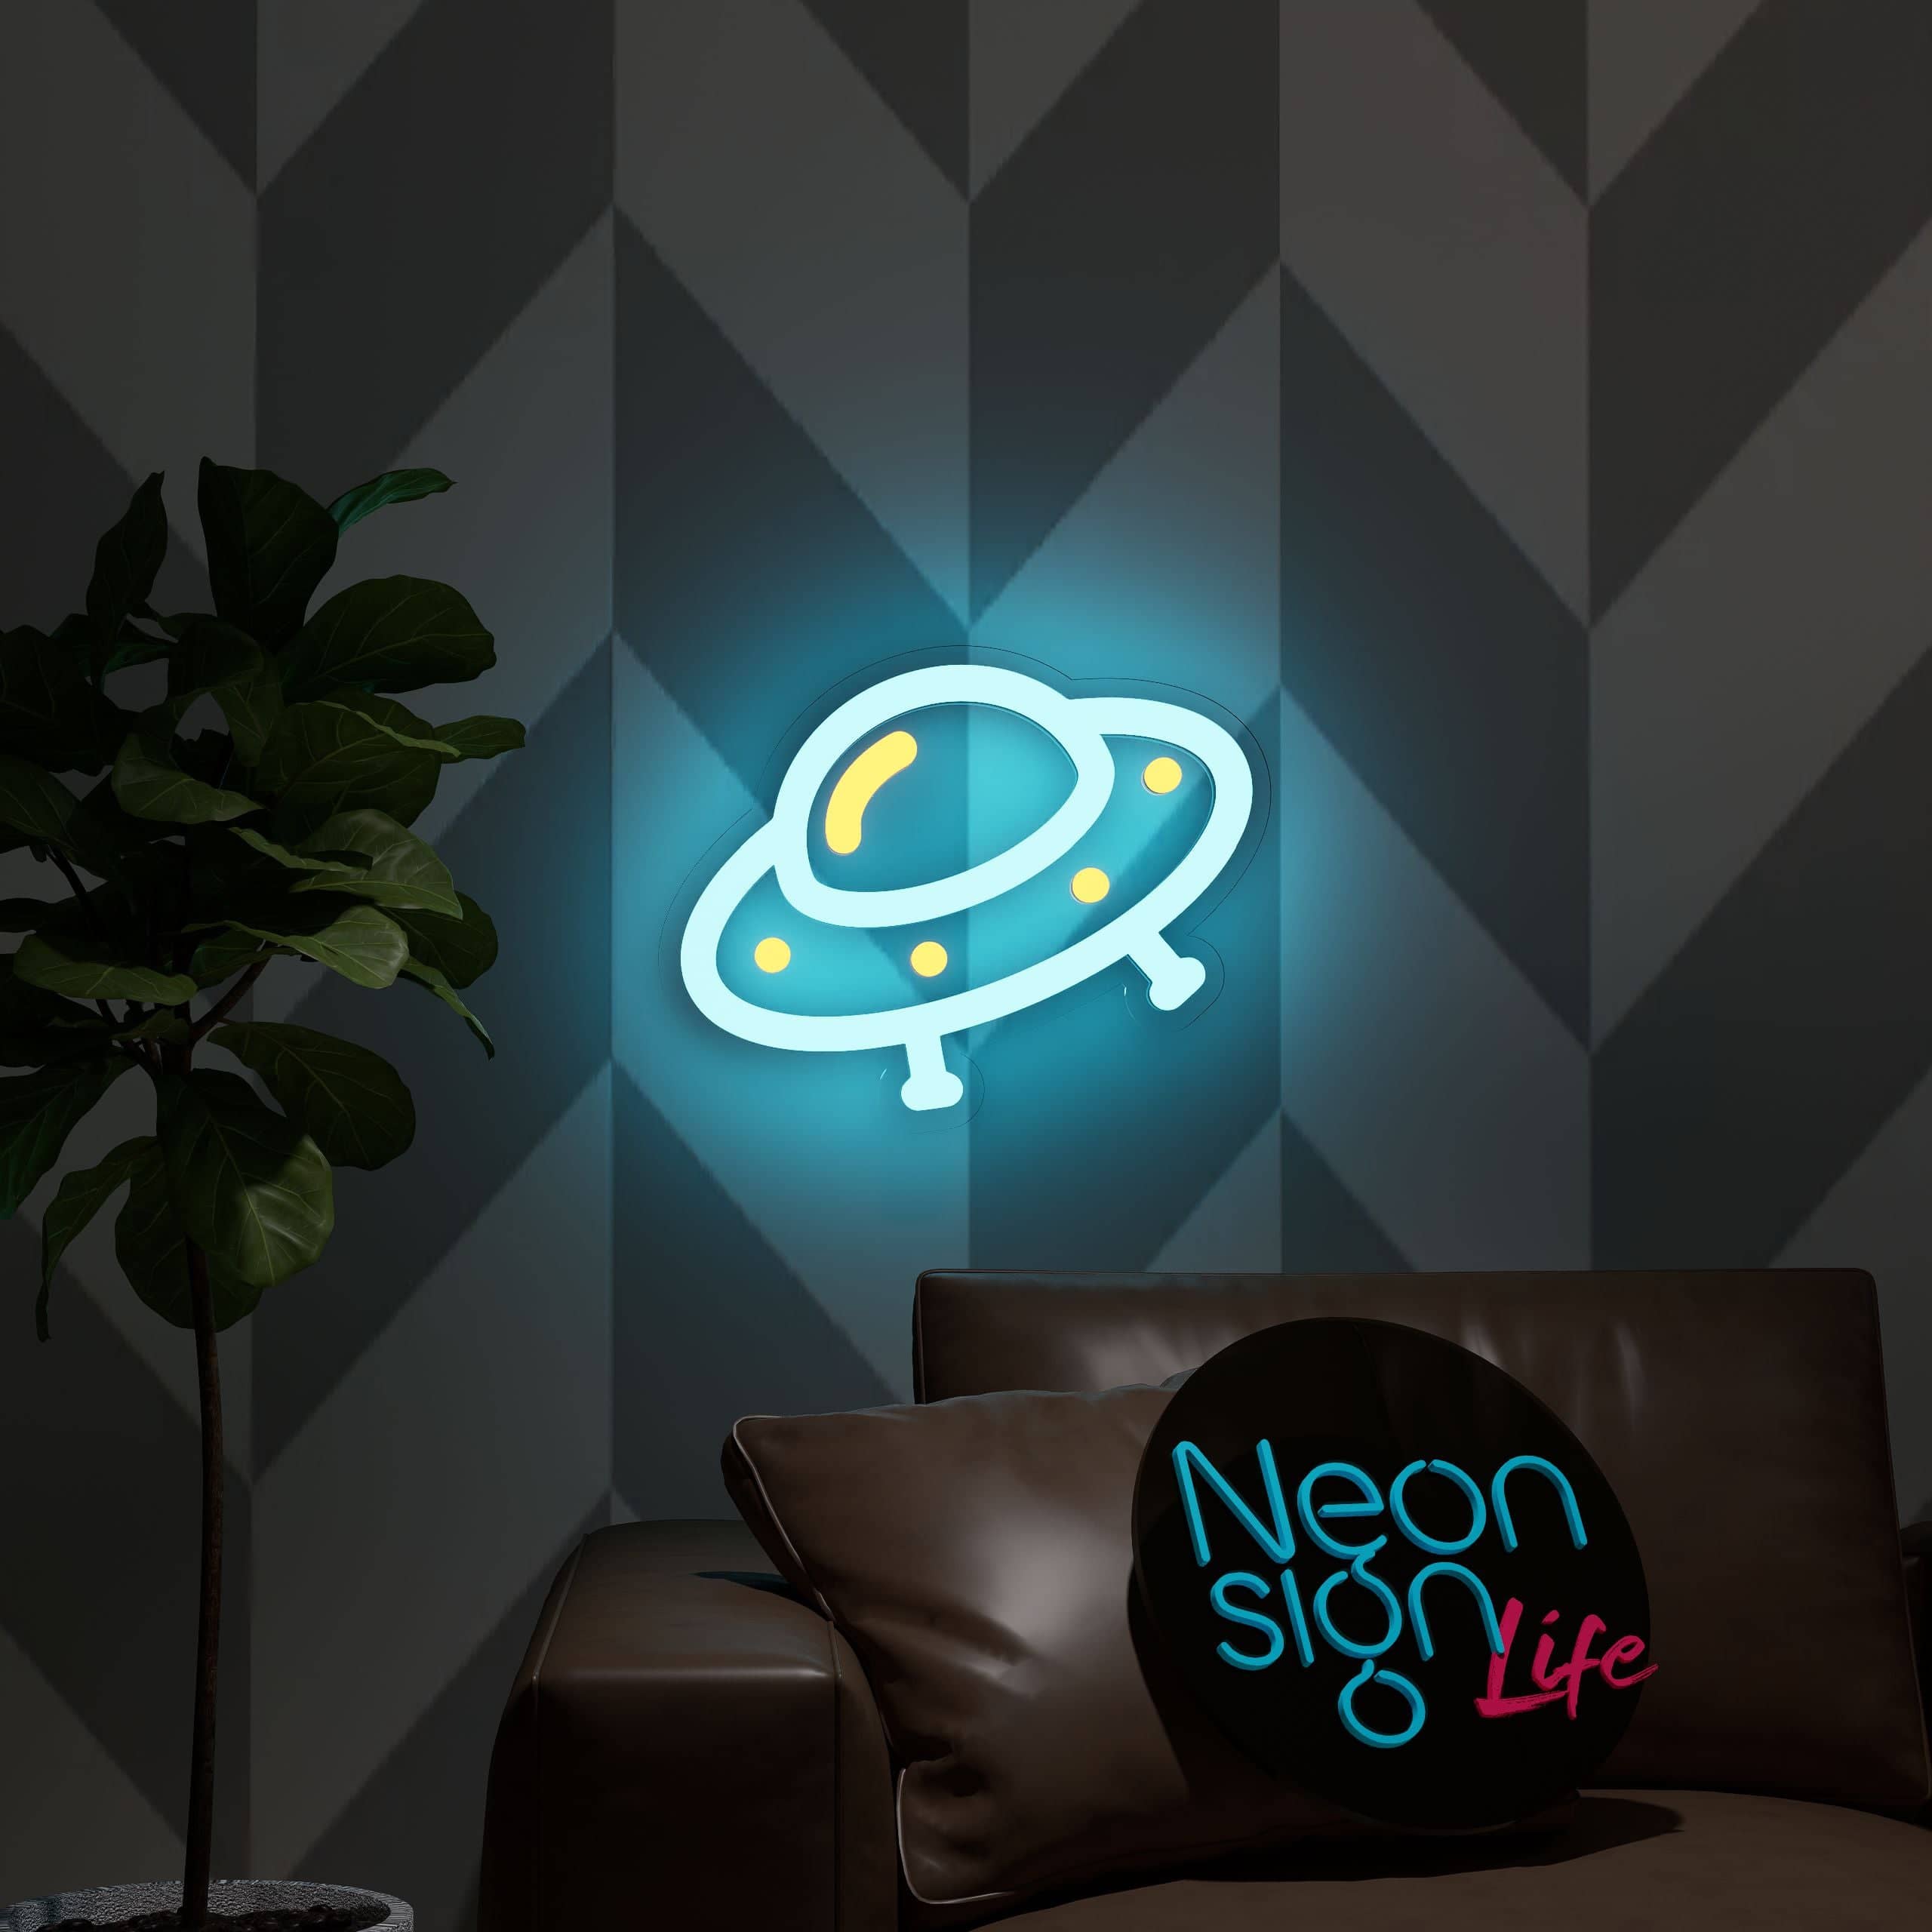 Neon kids sign shaped like a whimsical flying saucer